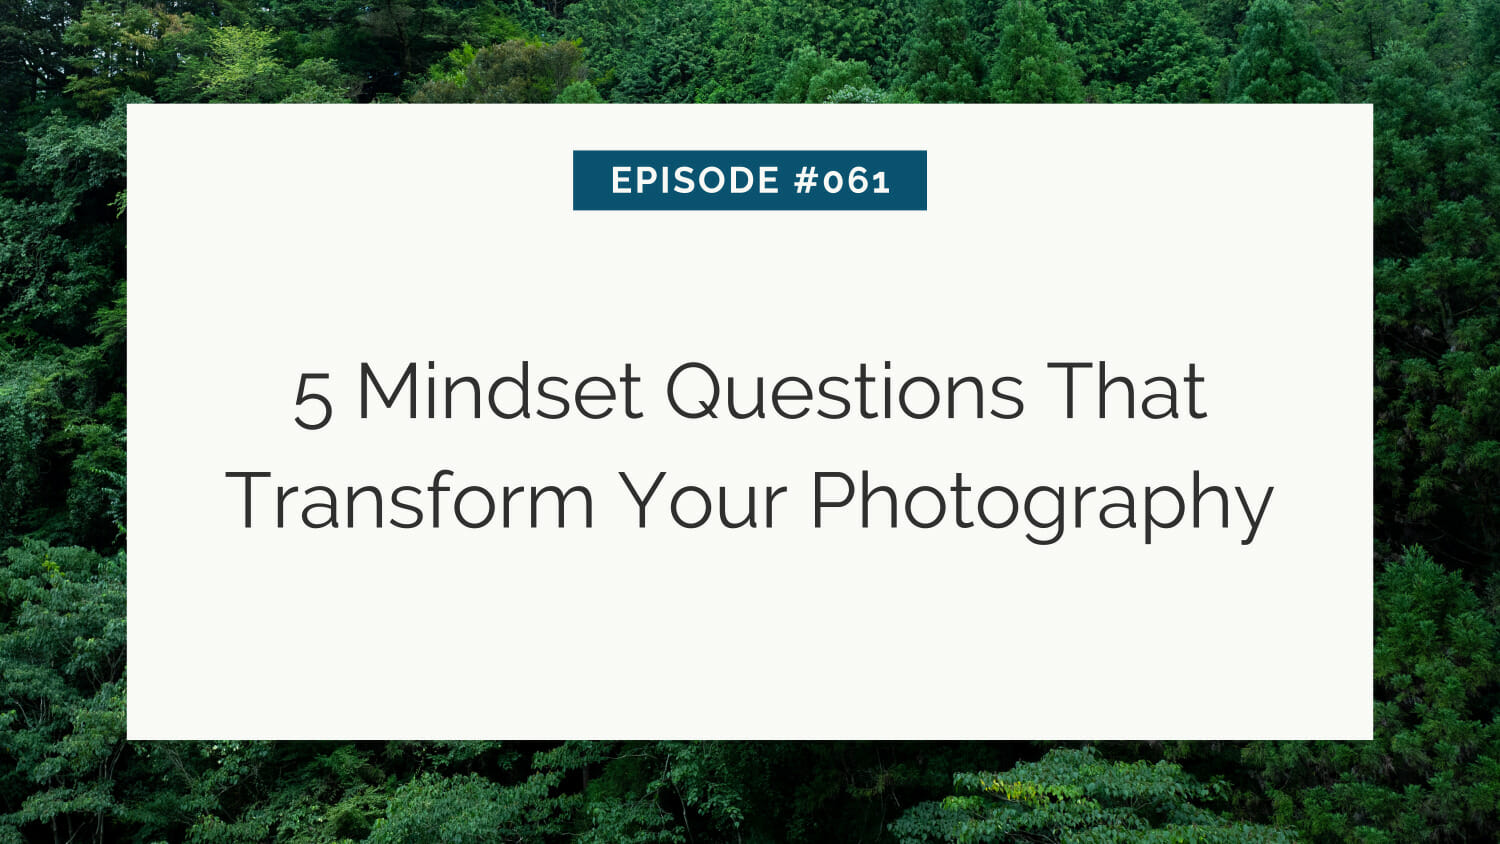 Text overlay on a forest backdrop: "episode #061 - 5 mindset questions that transform your photography.